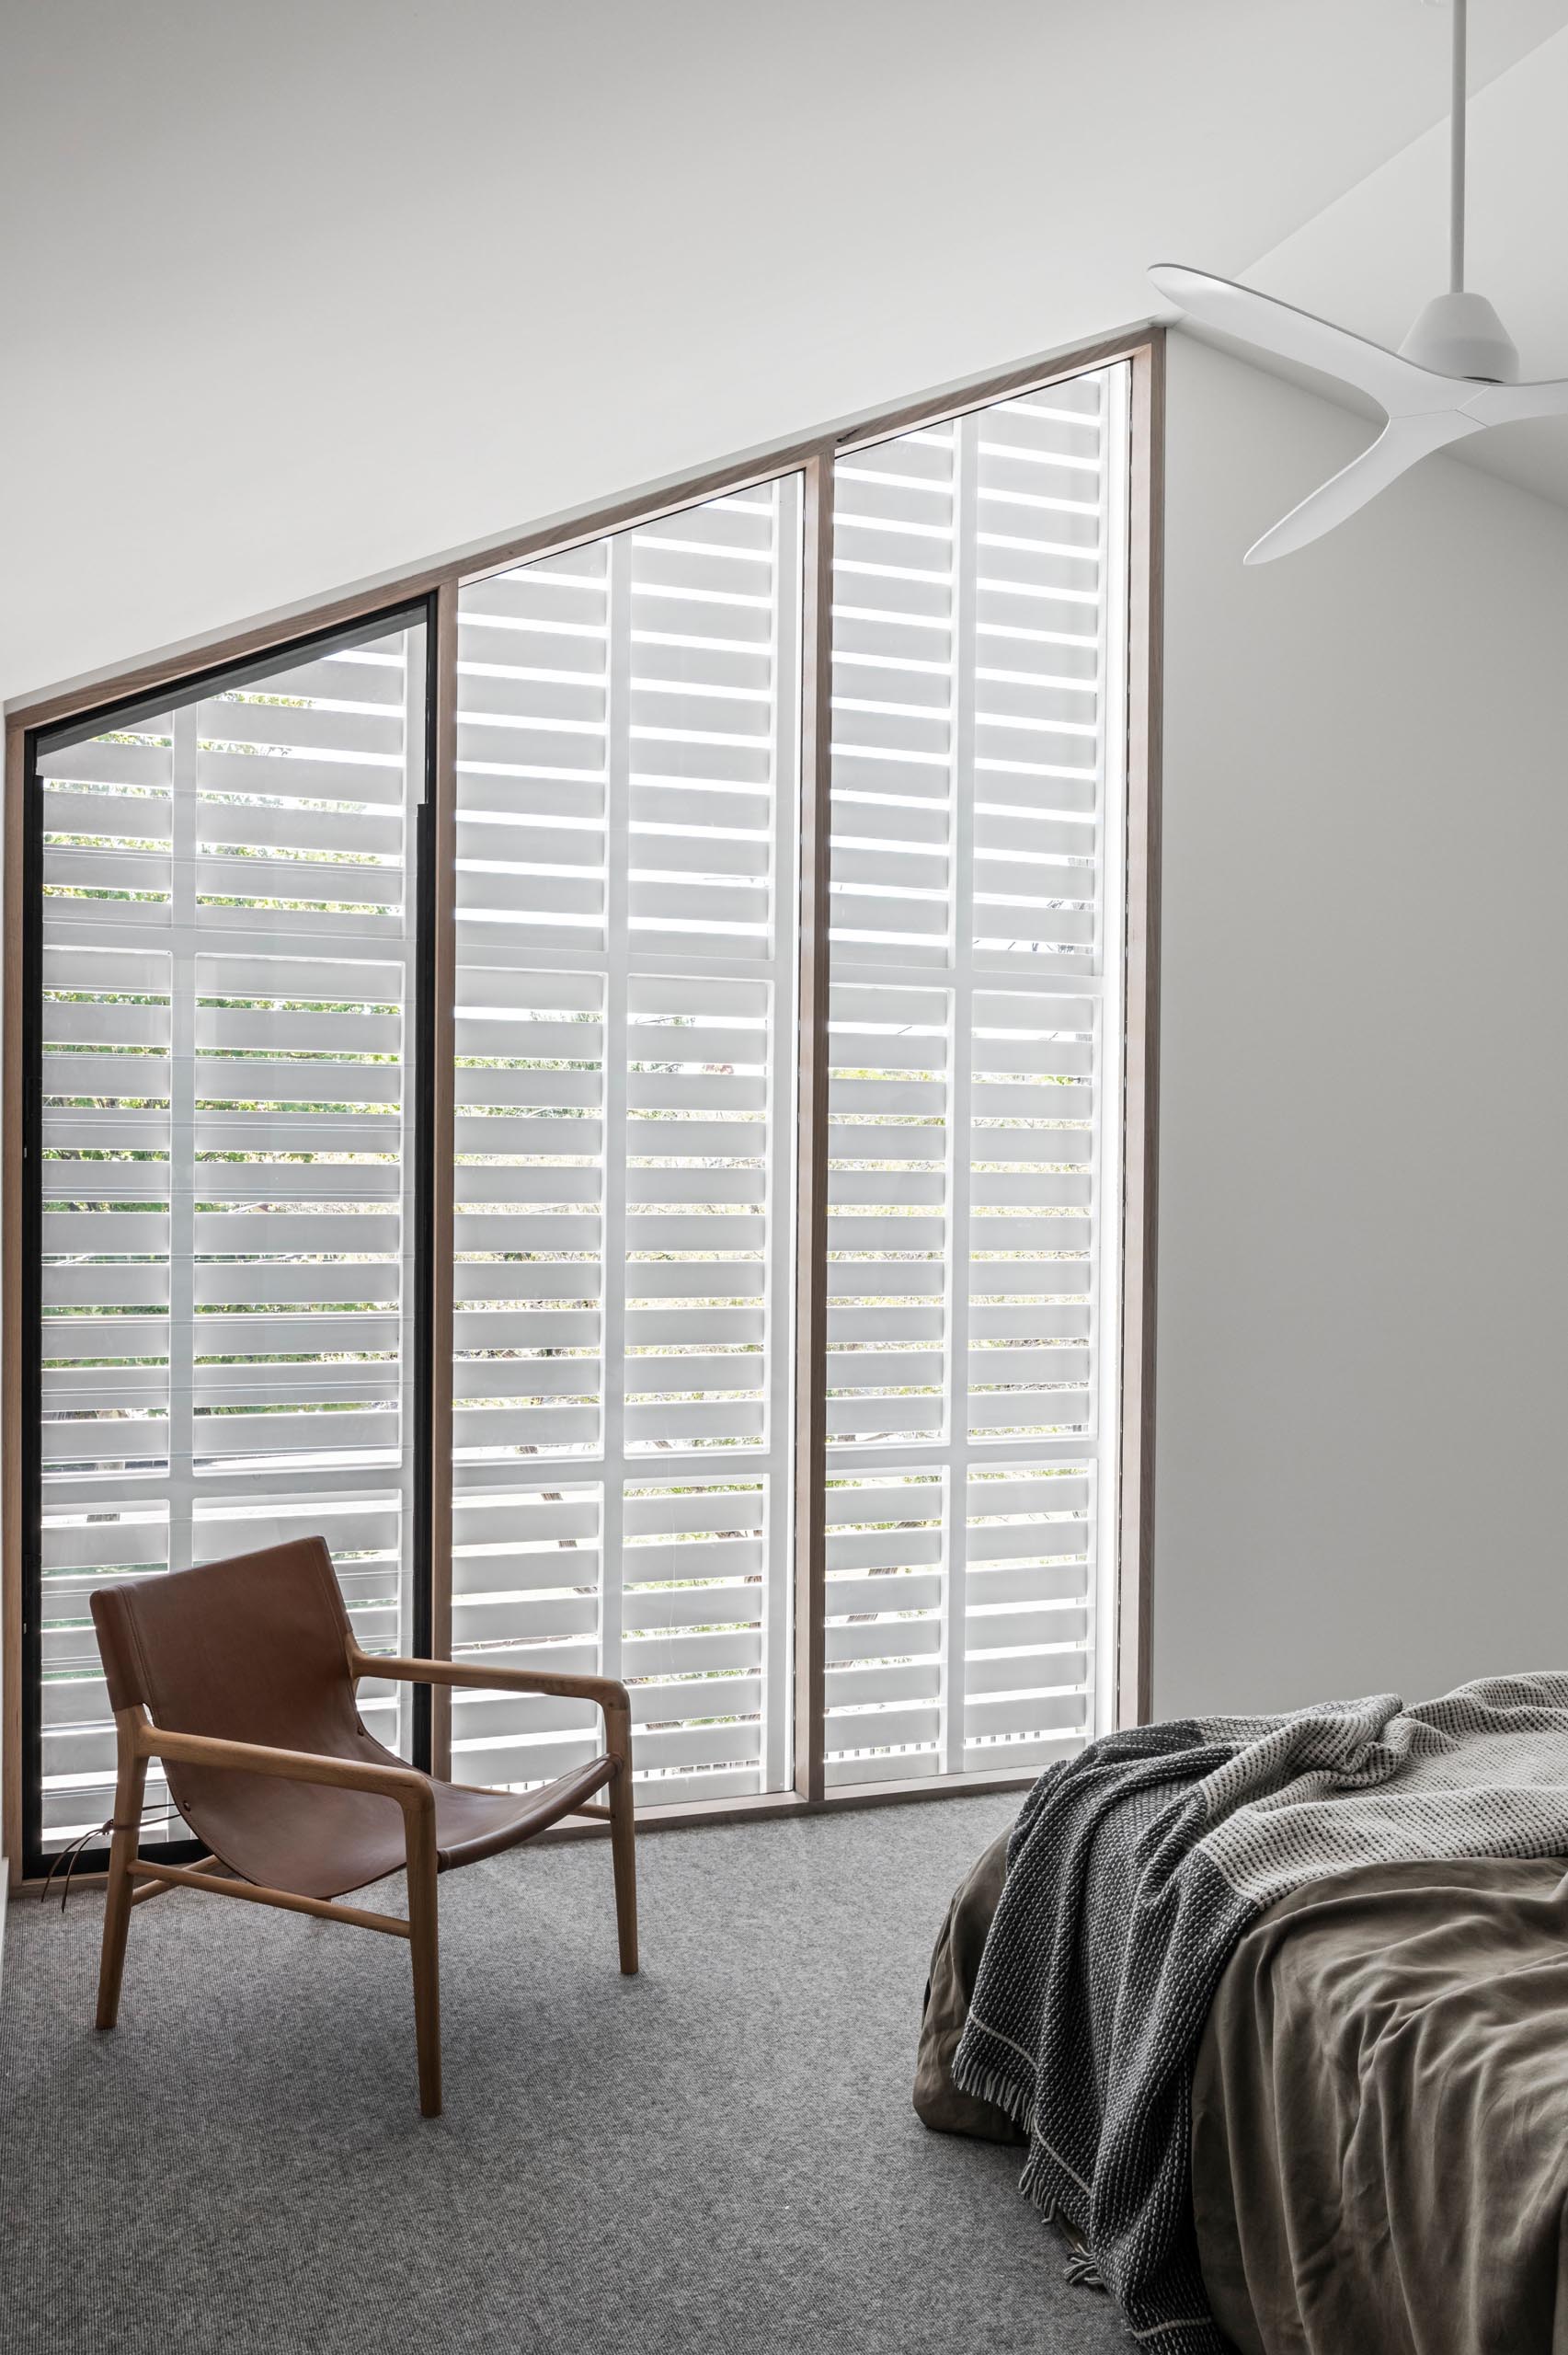 A modern bedroom with exterior shutters that can open to provide street views, or closed for privacy.